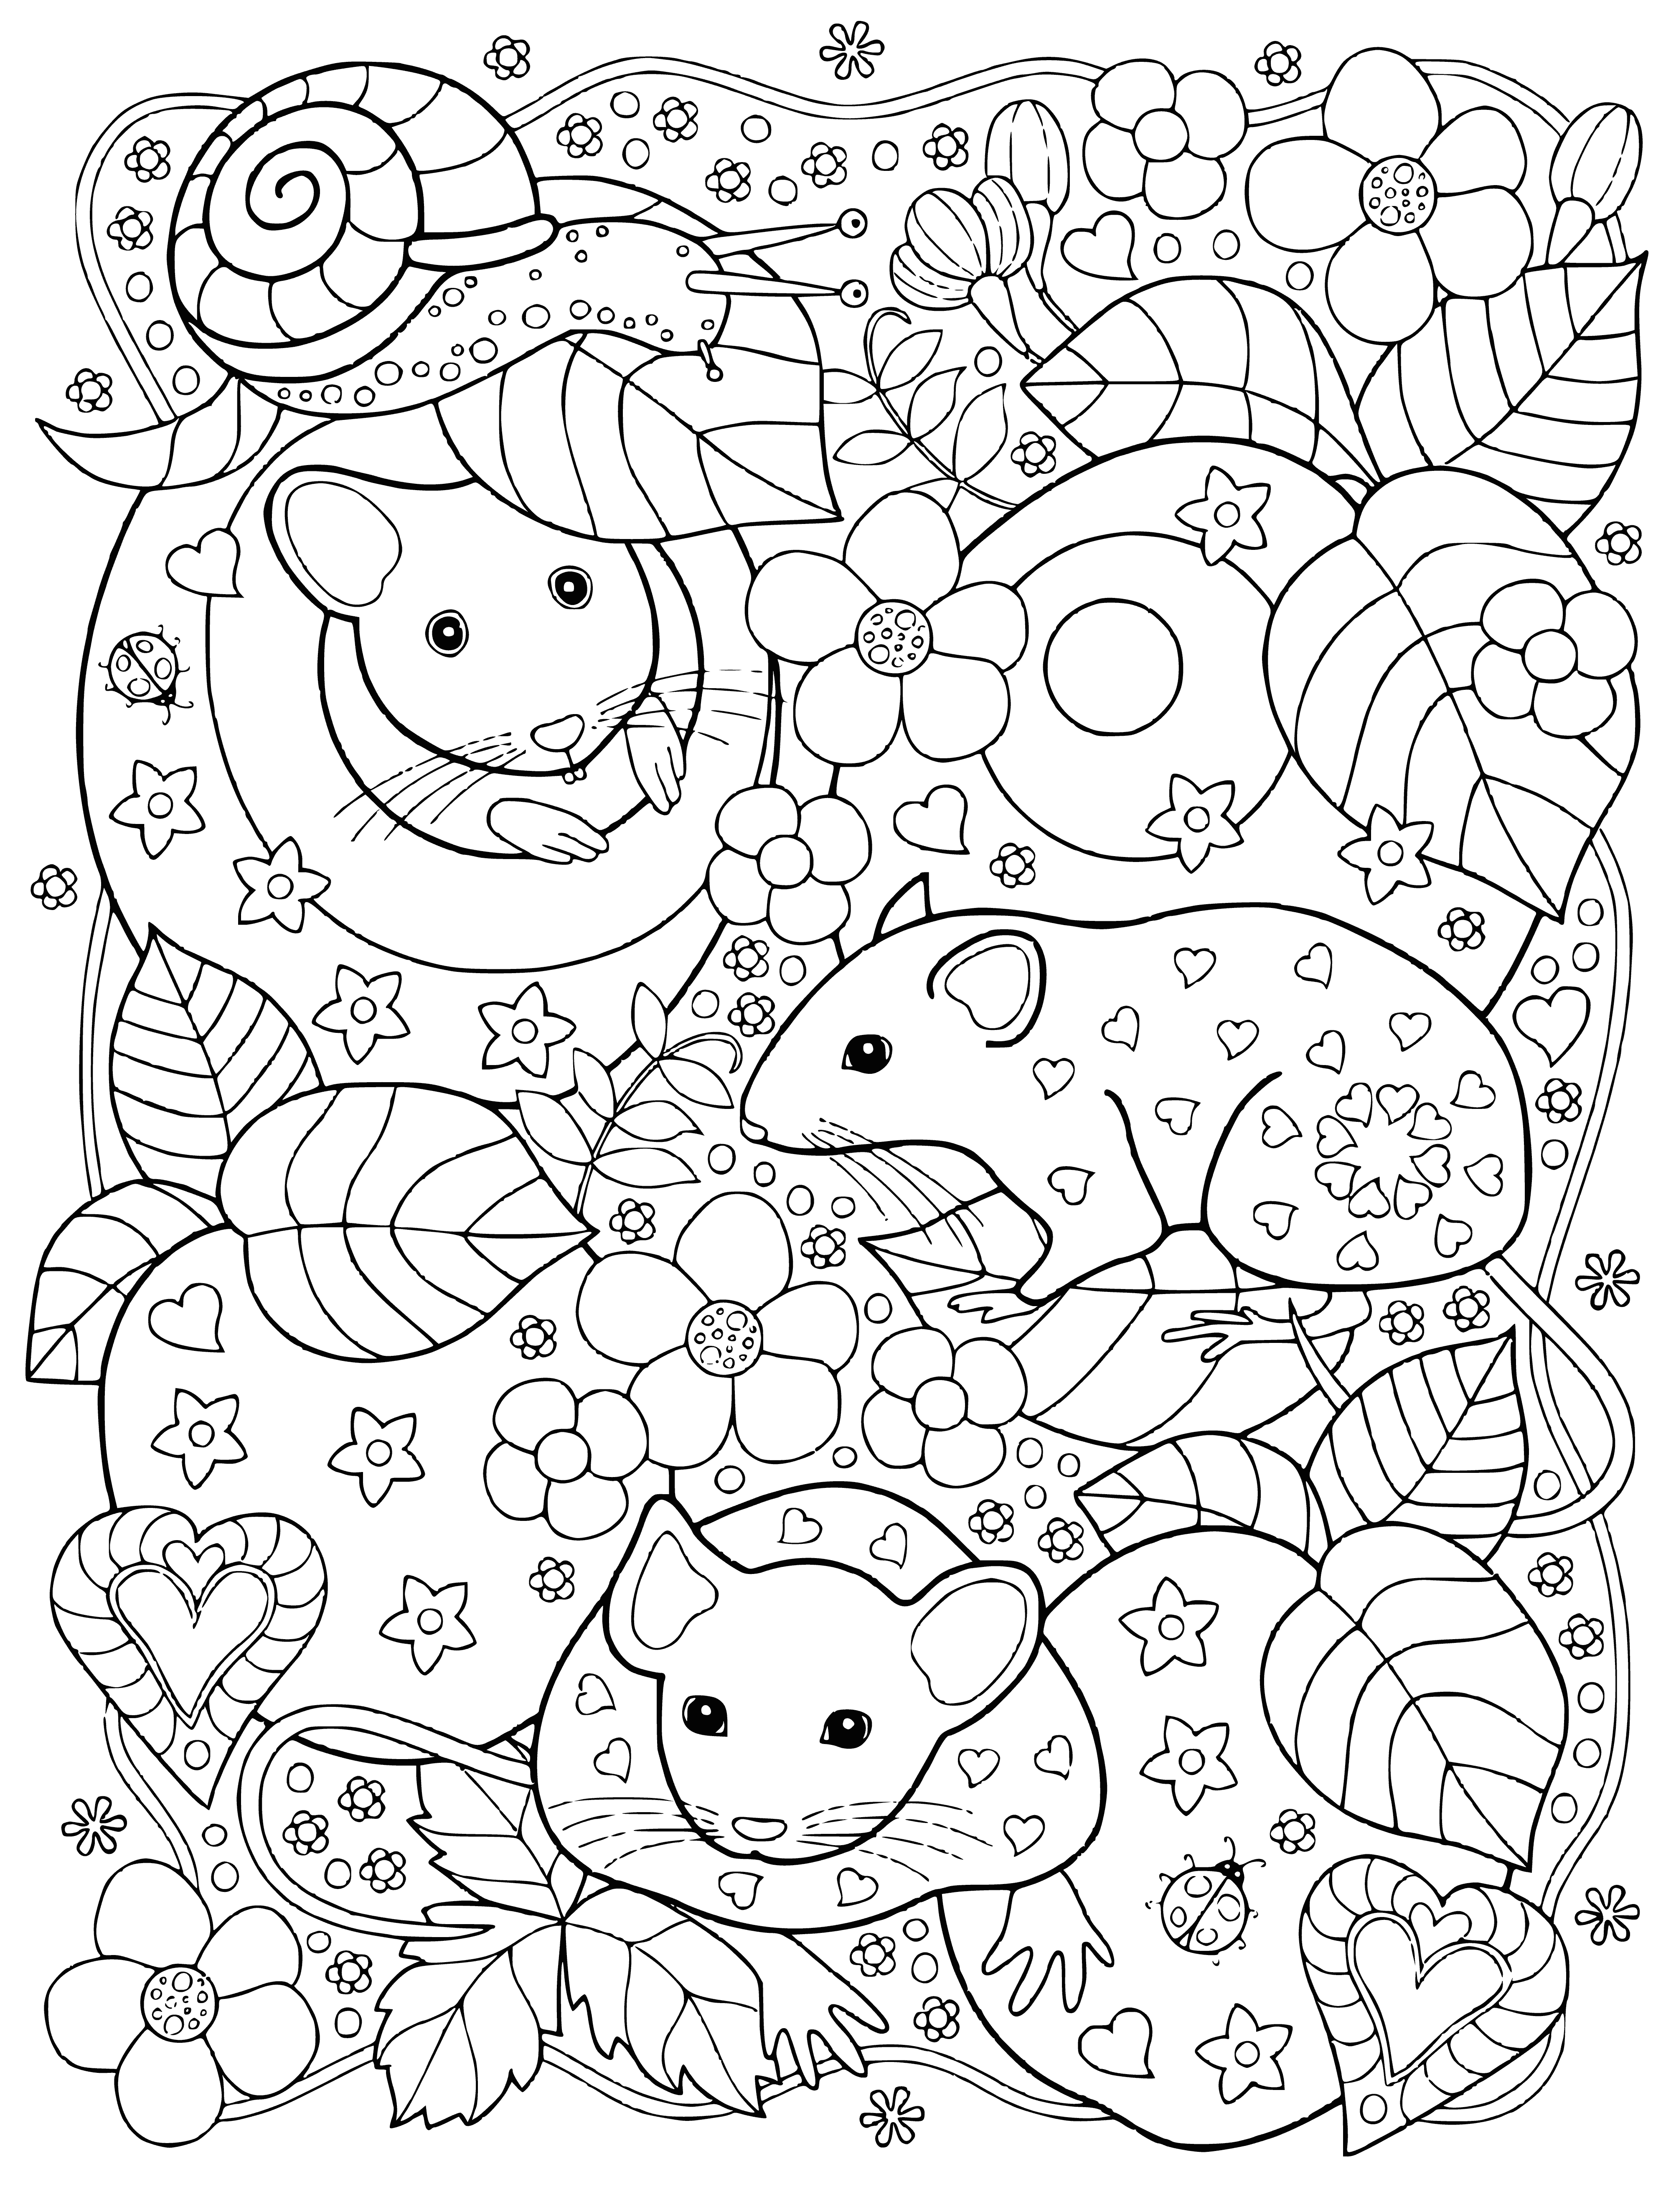 coloring page: Coloring cute mice in a garden - yellow flowers, green bush and blue sky. Relax and destress!